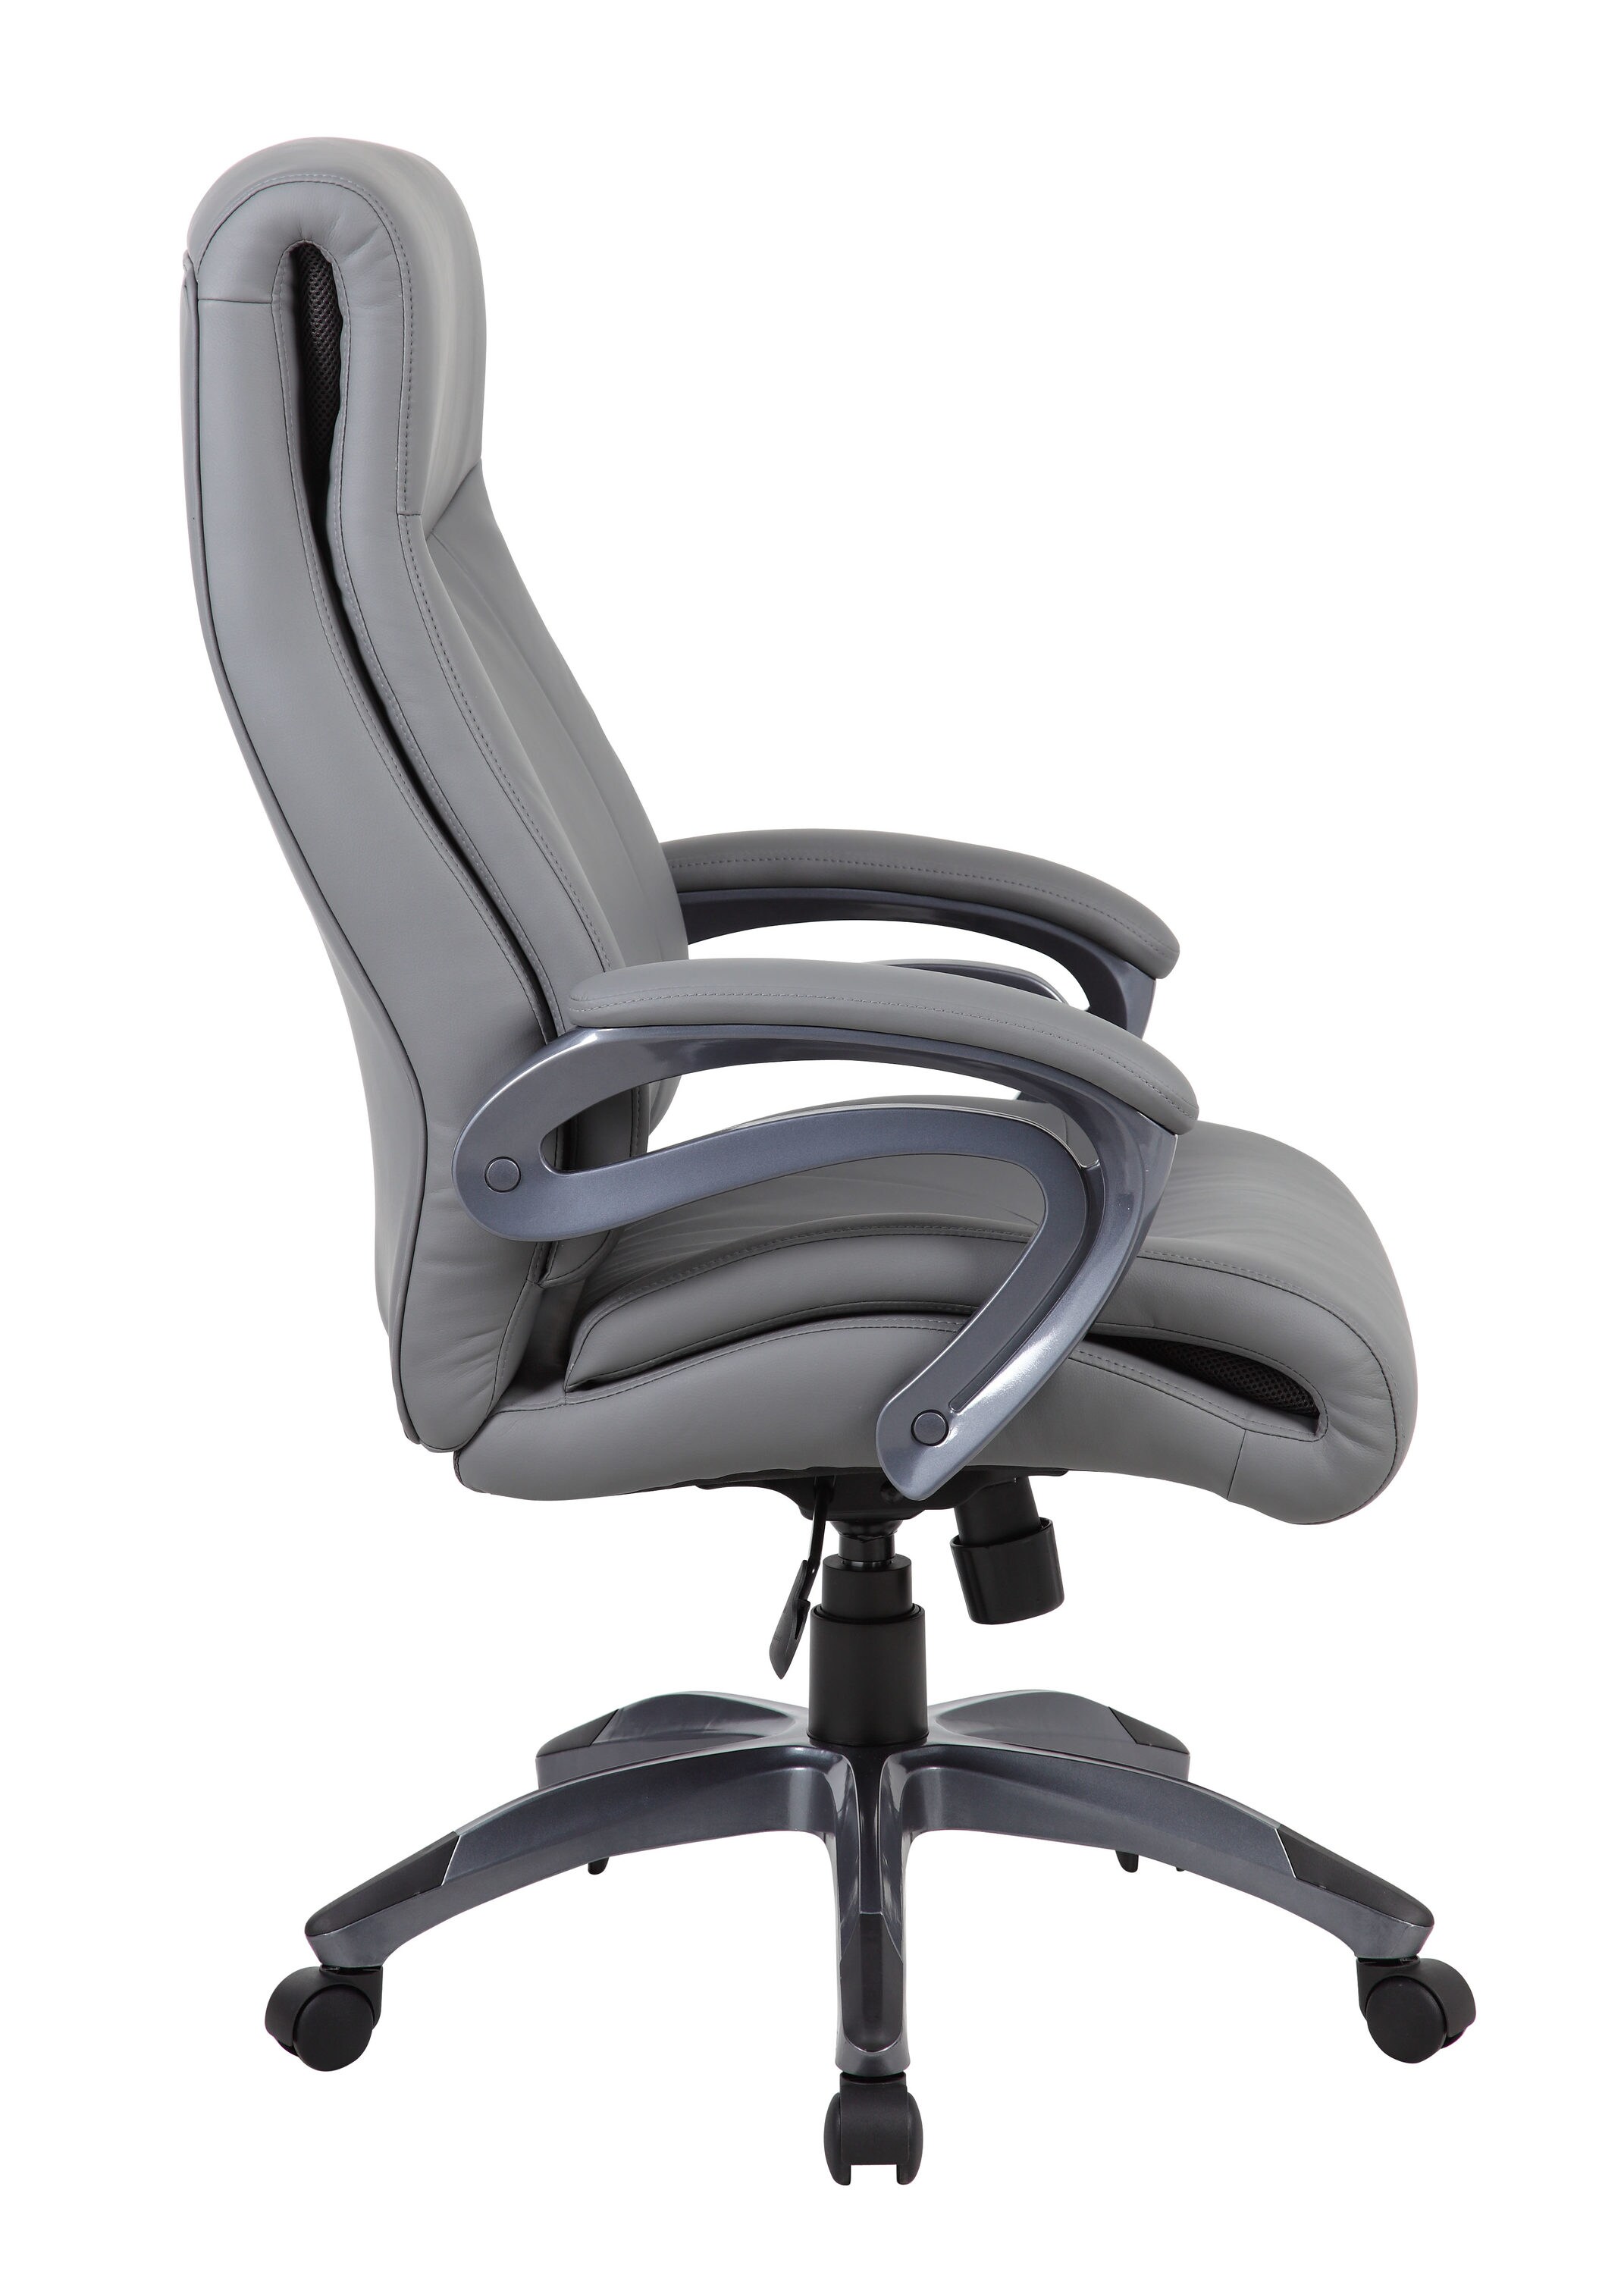 Exclusive car seats for home and office » GT-Chairs